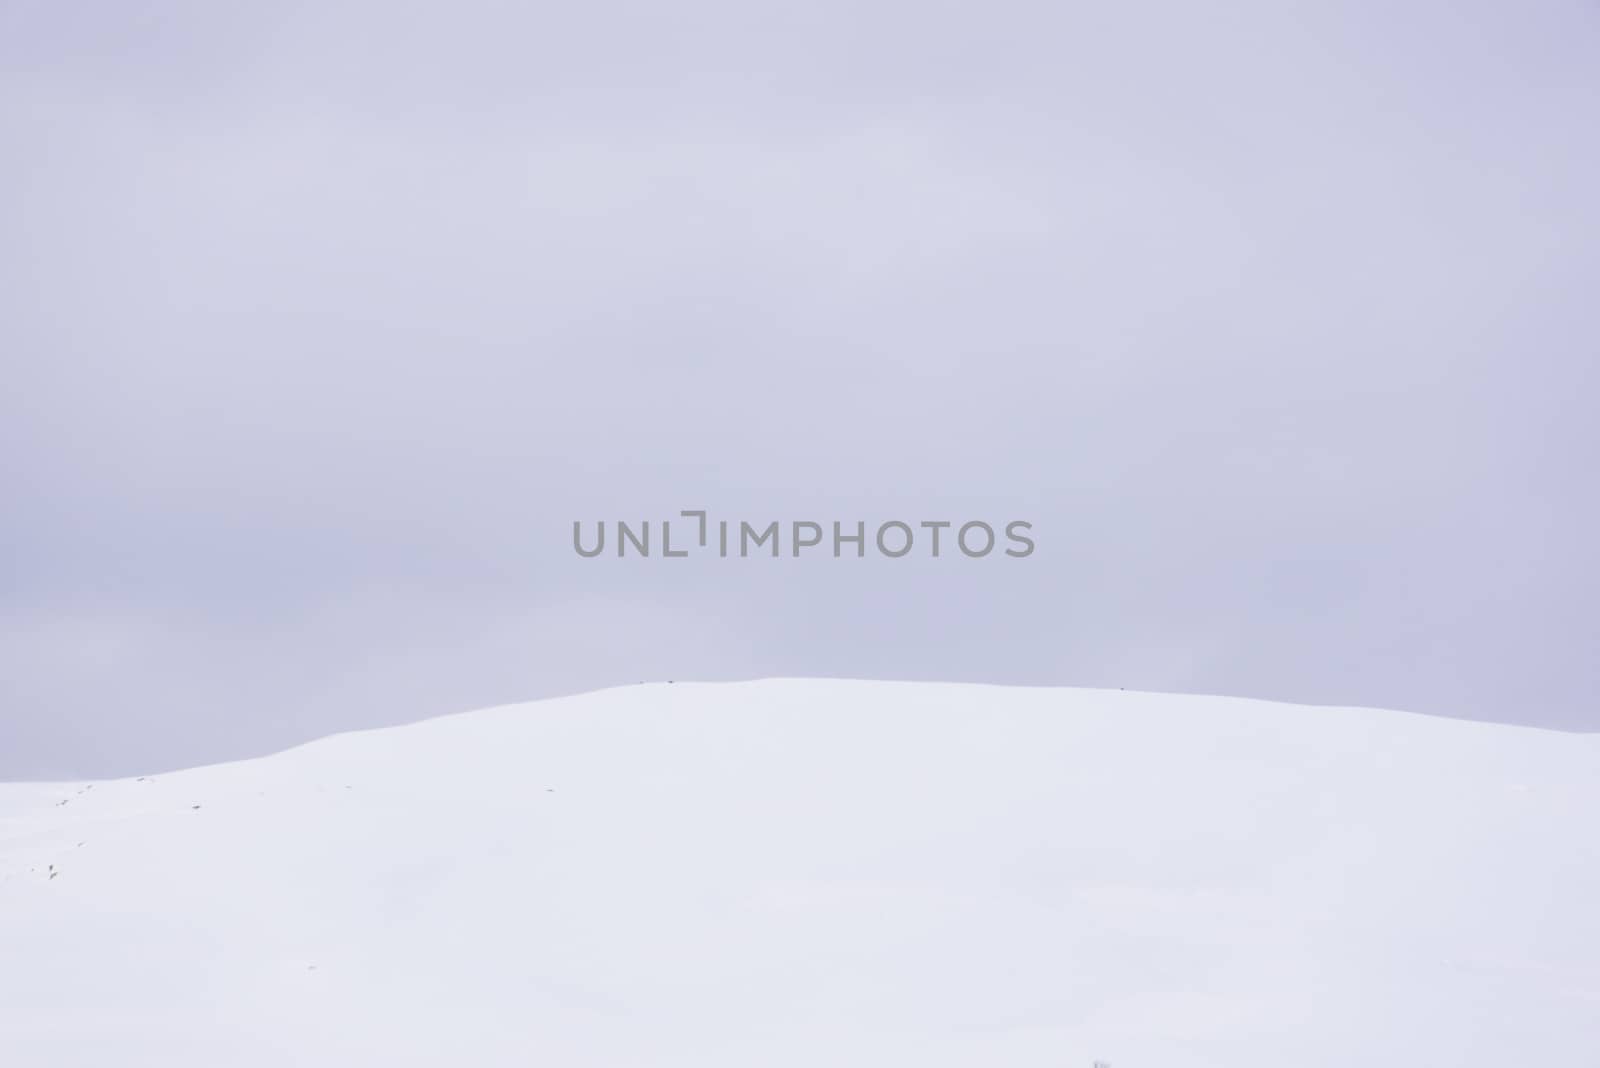 A hill covered in snow against a blue pale sky